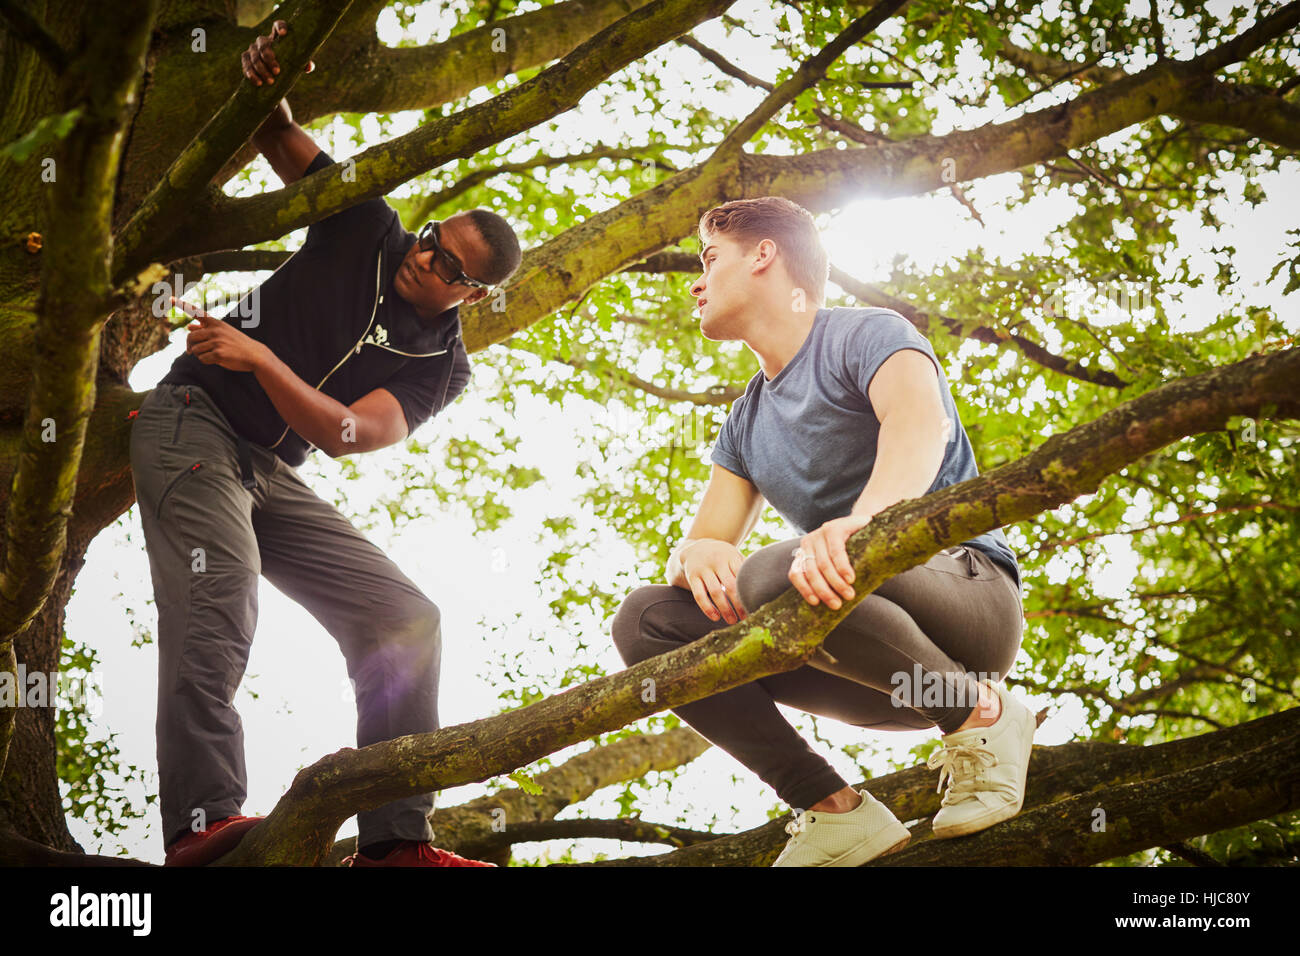 Man with personal trainer instructing how to climb tree in park Stock Photo